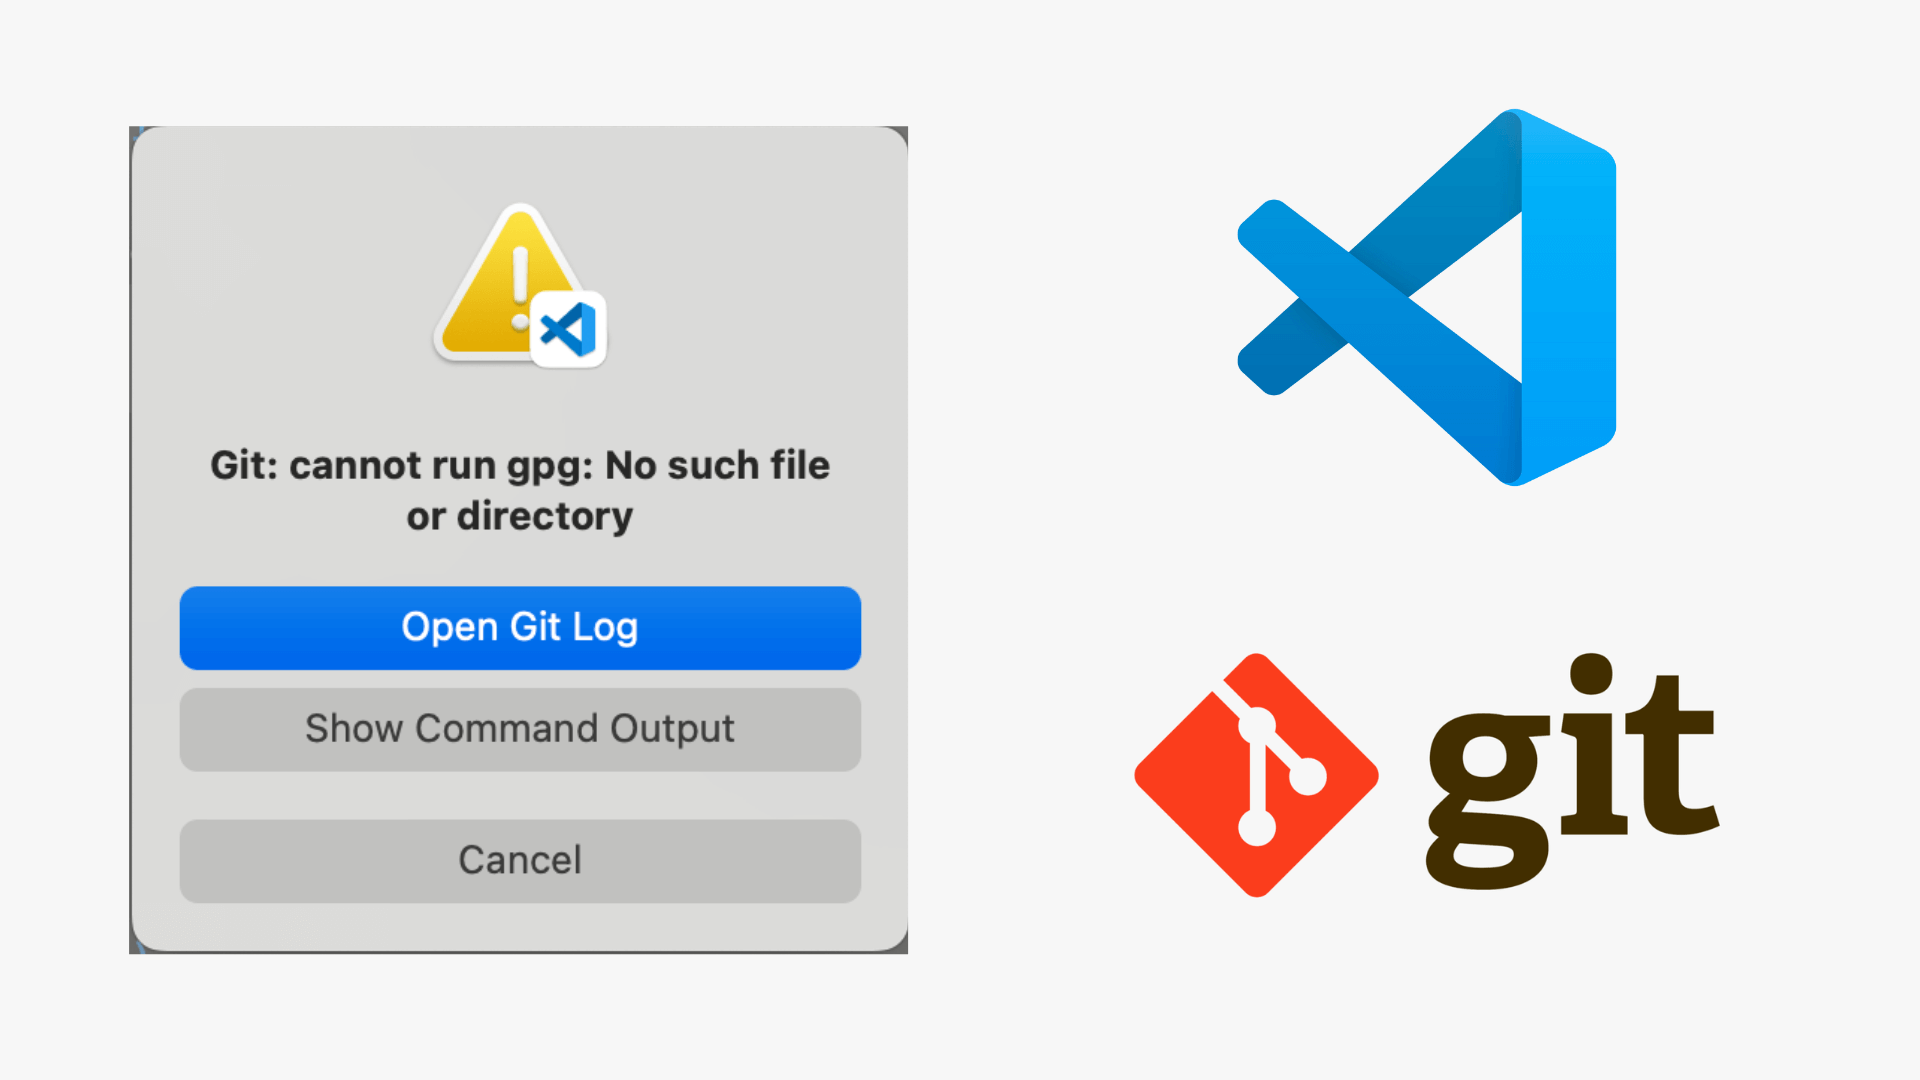 No such directory app. No such file or Directory.